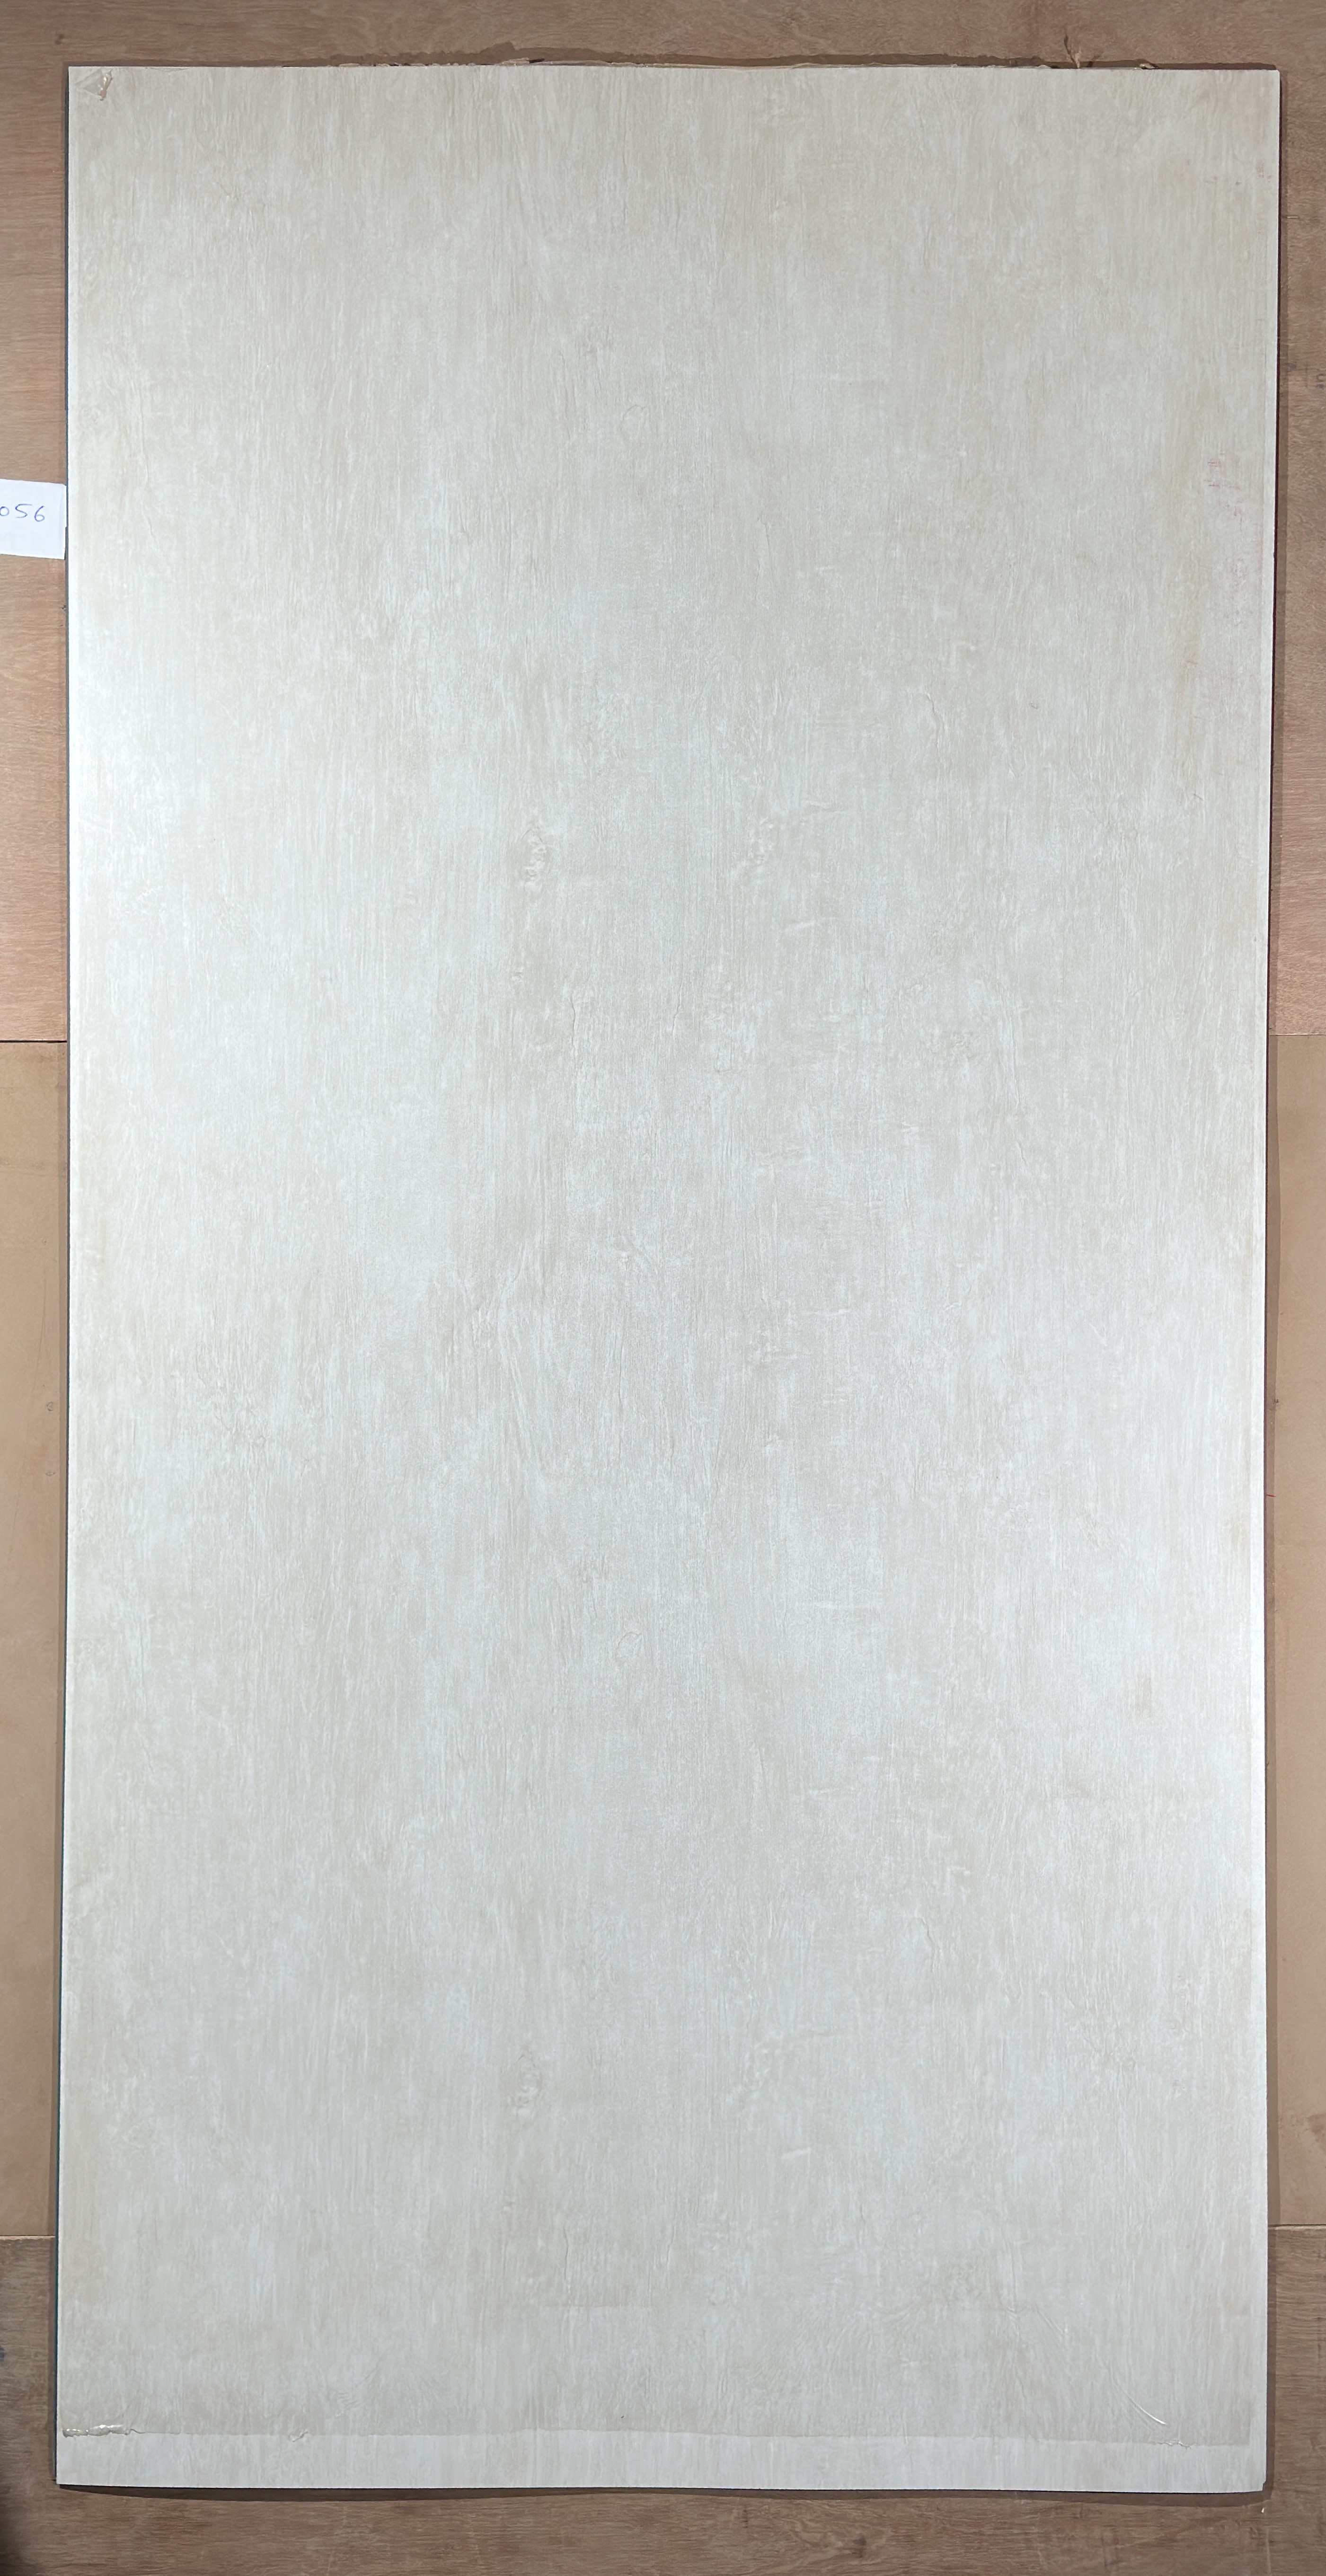 86056 SF White Decorative Laminate of 1 mm with a Suede finish available for sale at Material Depot in Bangalore